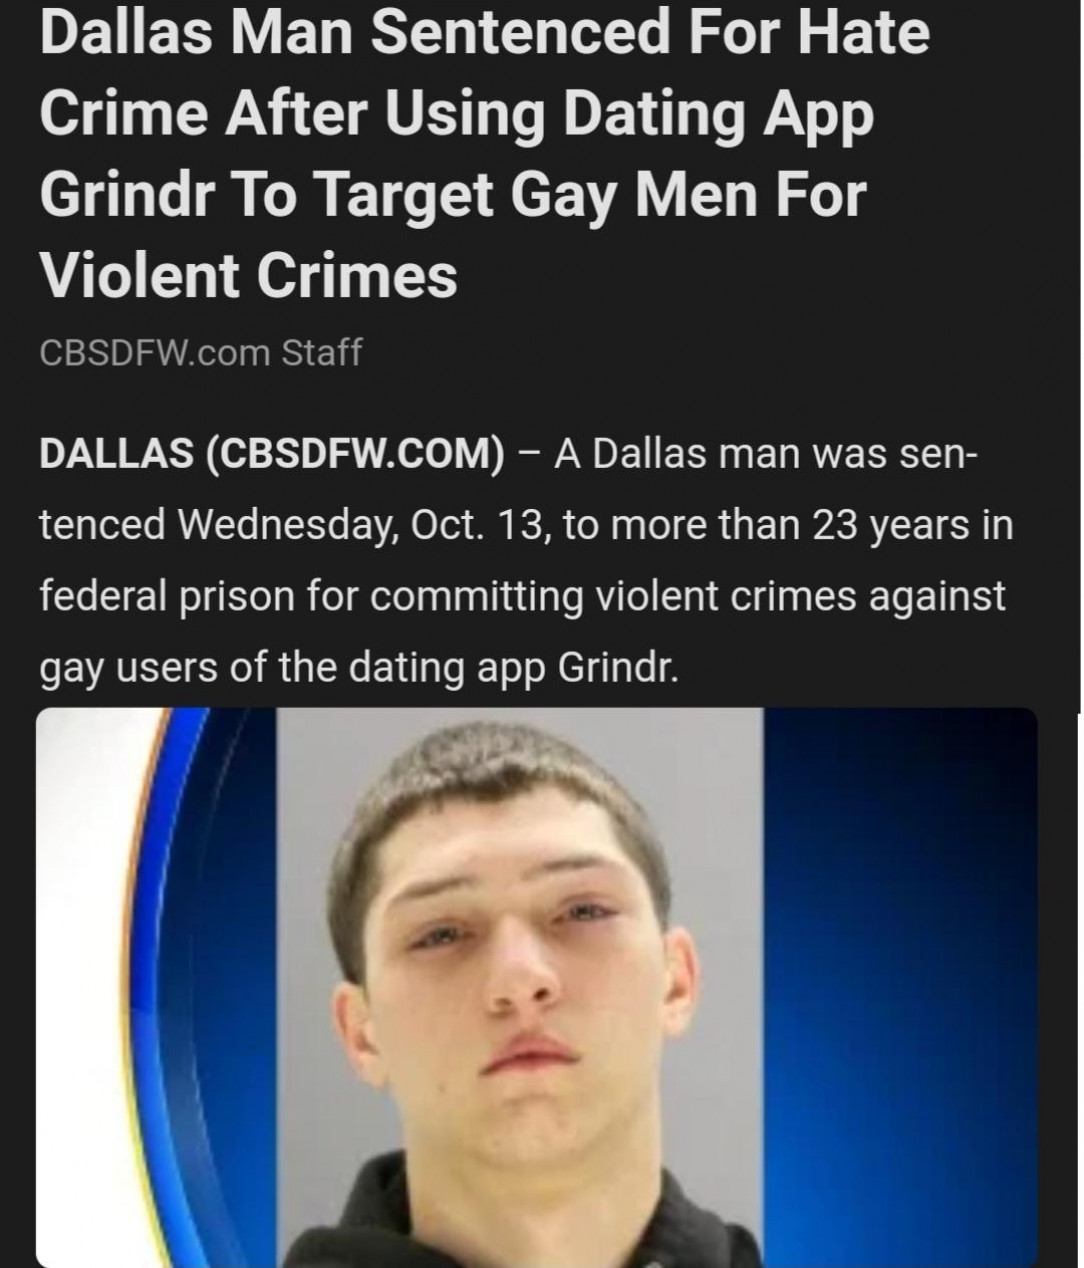 Targeting, robbing and assaulting gay men using Grindr